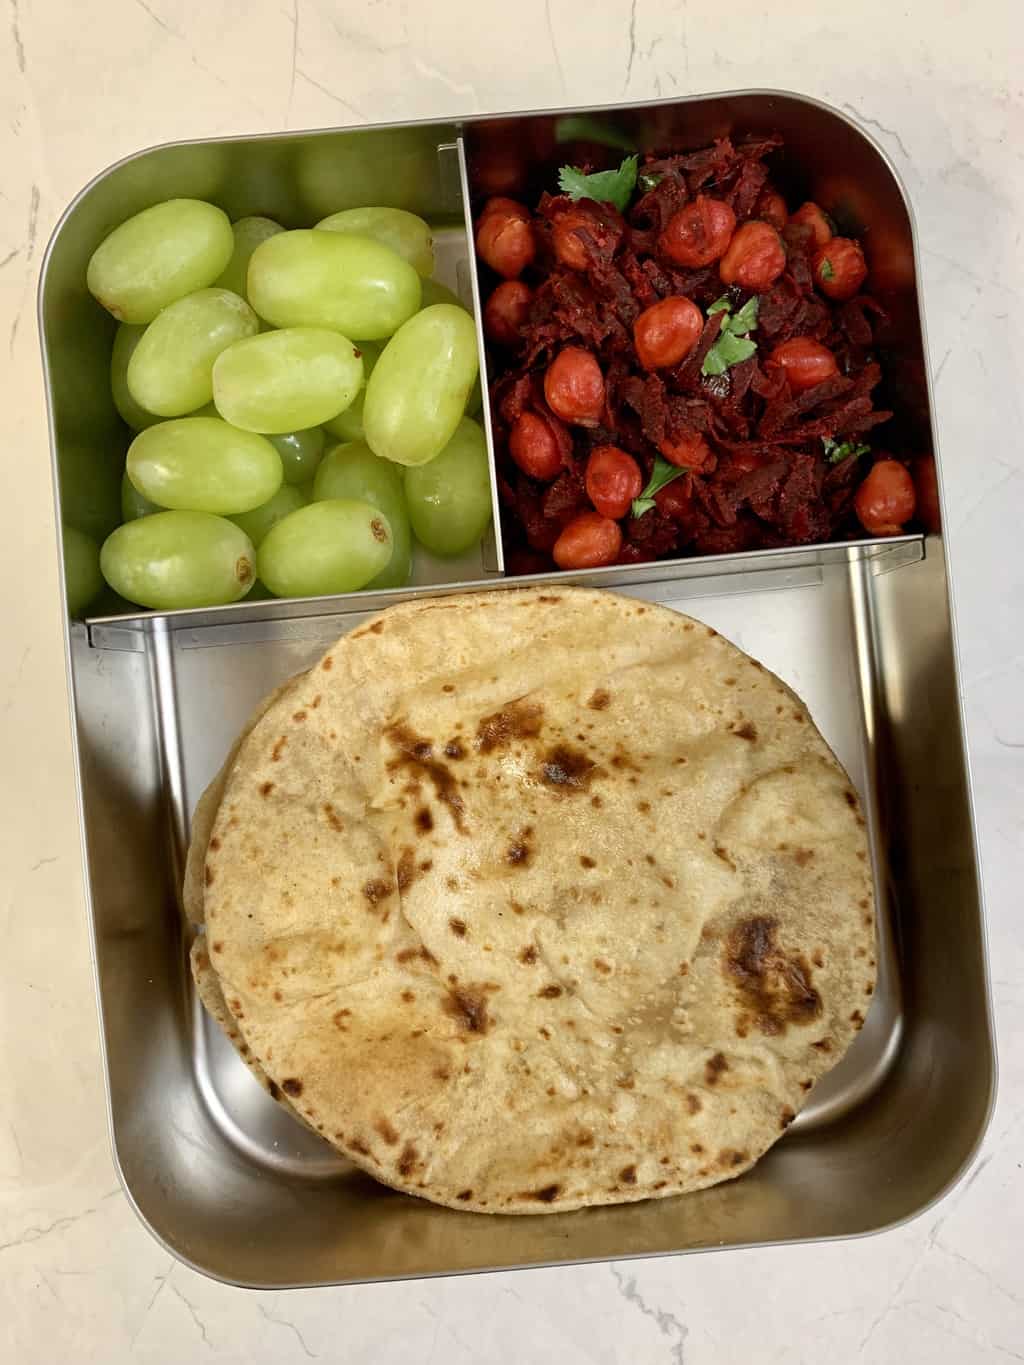 flax seed chapati with beetroot chickpeas stir fry and grapes in bento steel lunch box